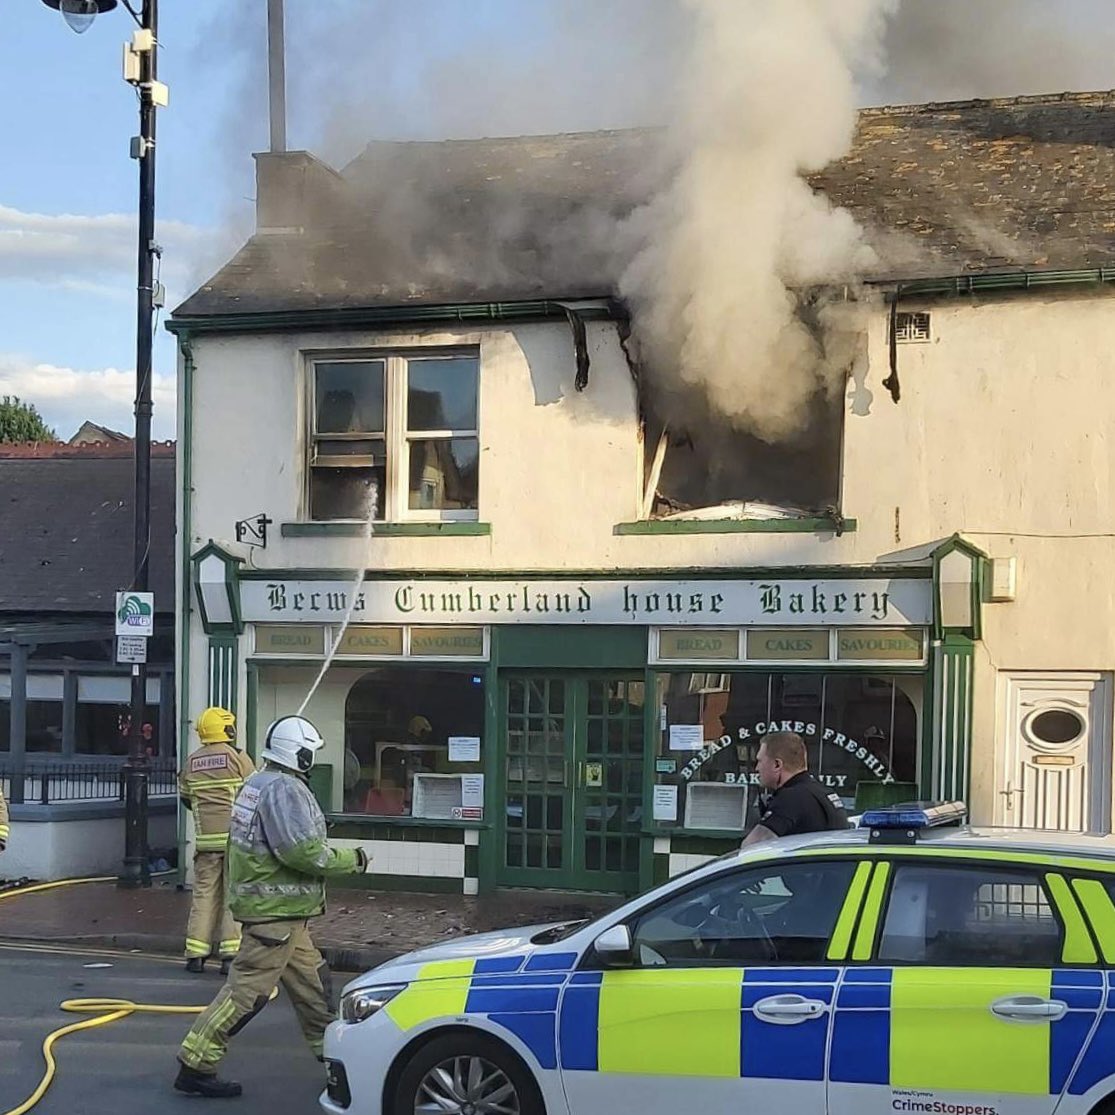 Market Street #Abergele closed from St Georges Road through Abergele whilst @NorthWalesFire currently deal with a fire above Cumberland House Bakery!